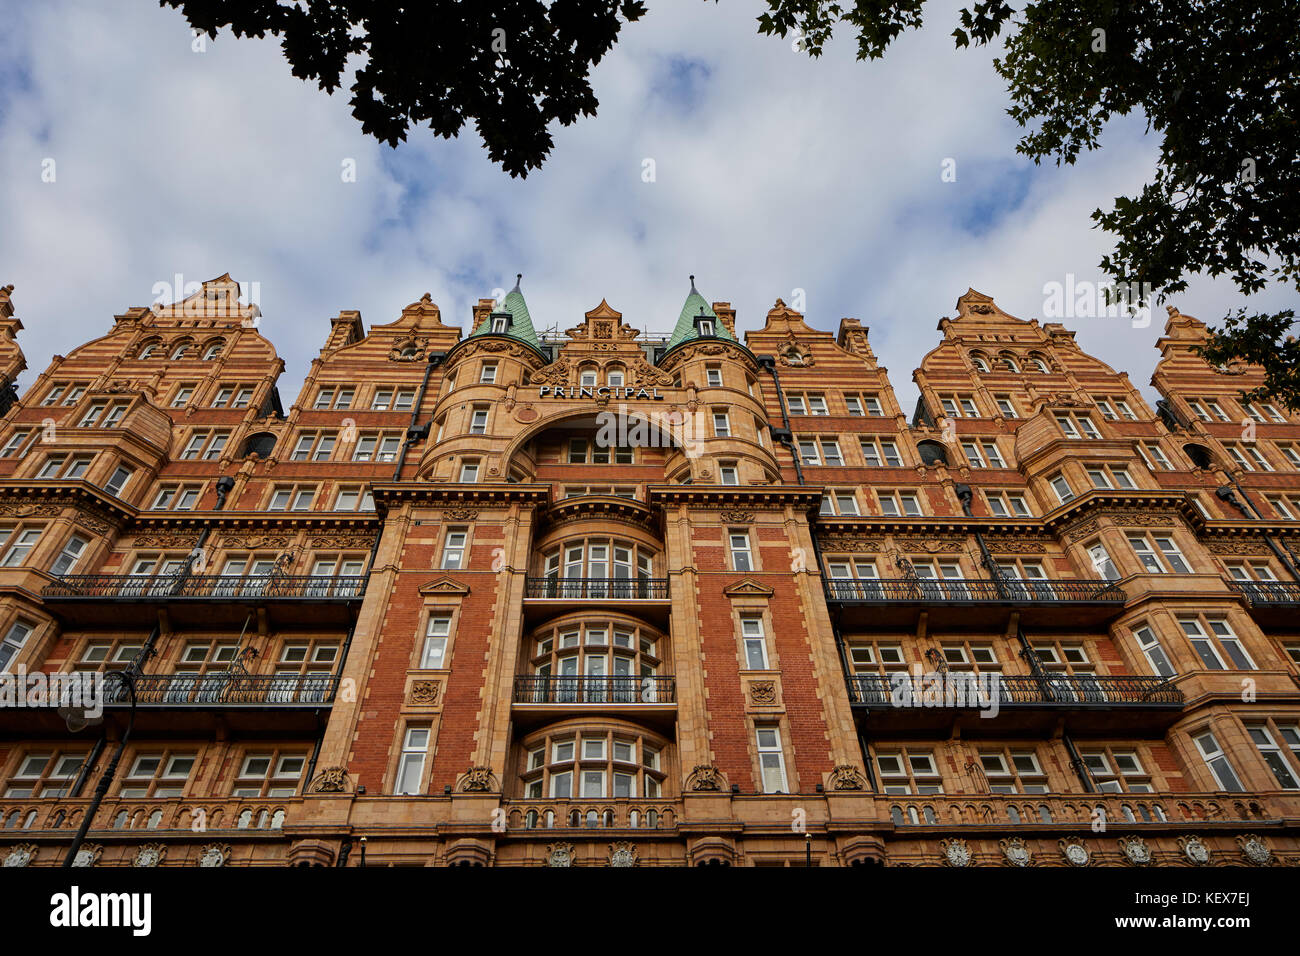 The Principal London formerly kn Hotel Russell, is a five-star hotel, located on Russell Square by architect Charles Fitzroy Doll in London the capita Stock Photo